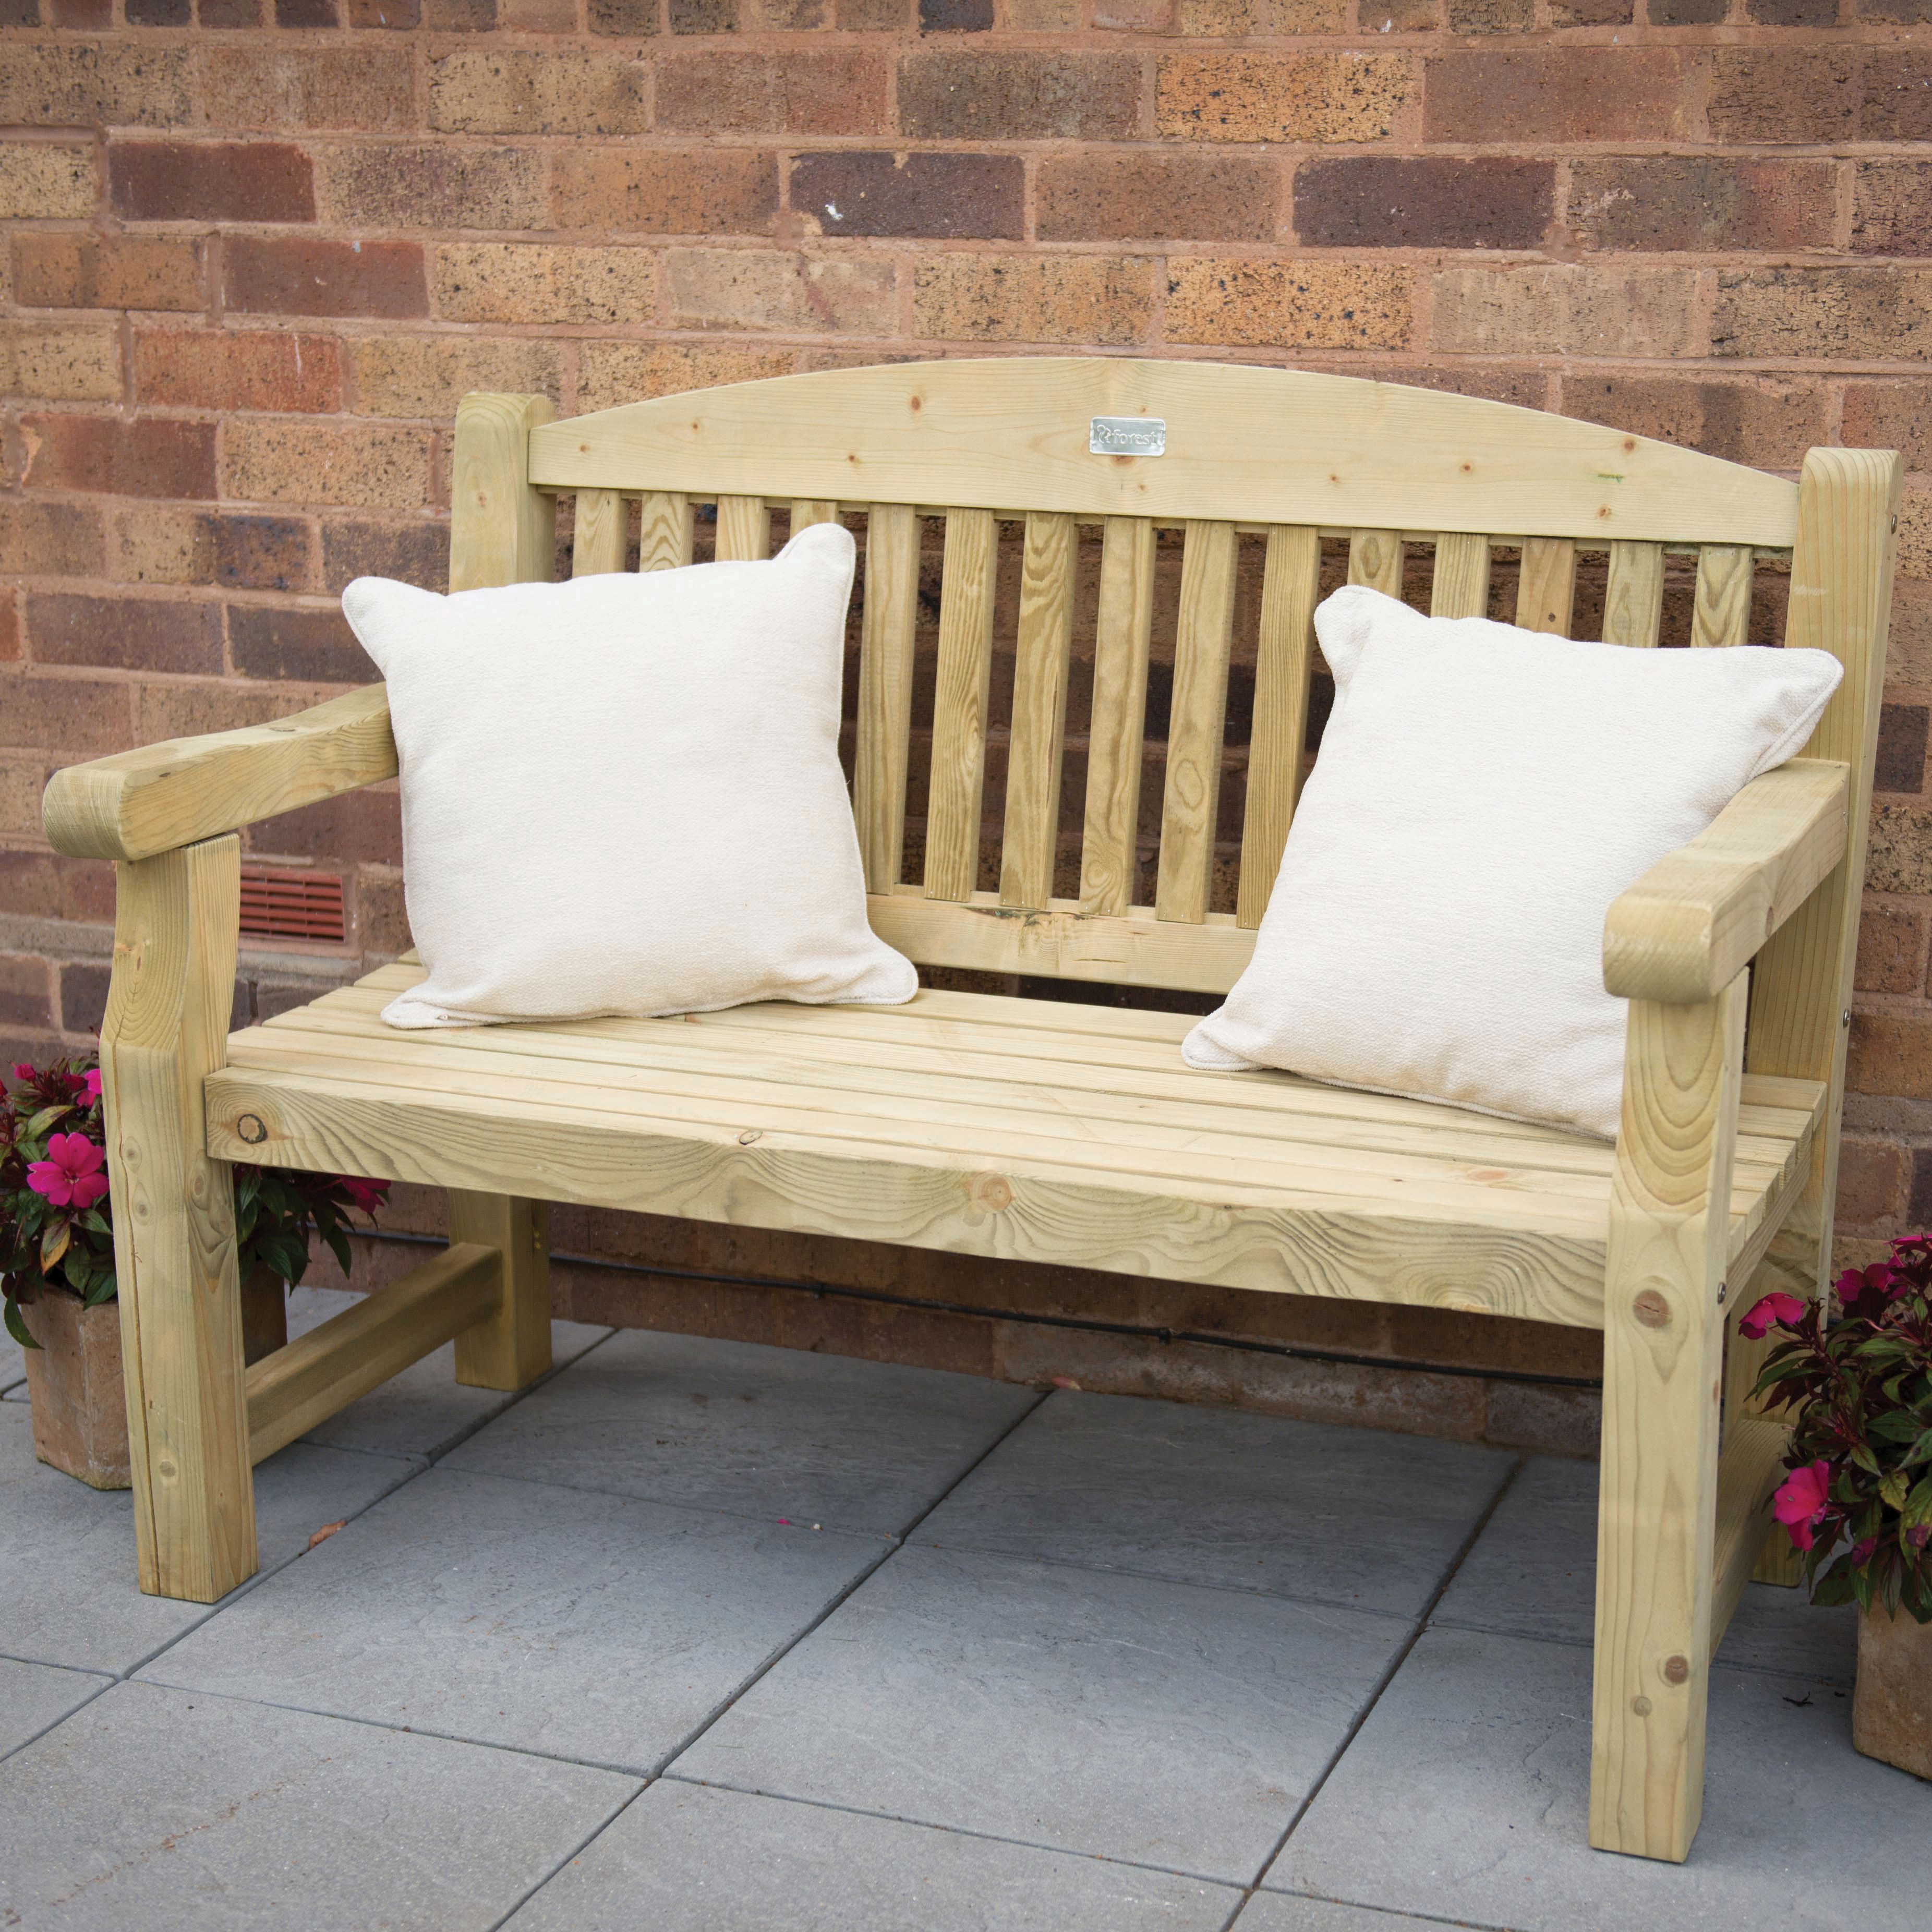 Image of Forest Garden Harvington Bench - 1.2m